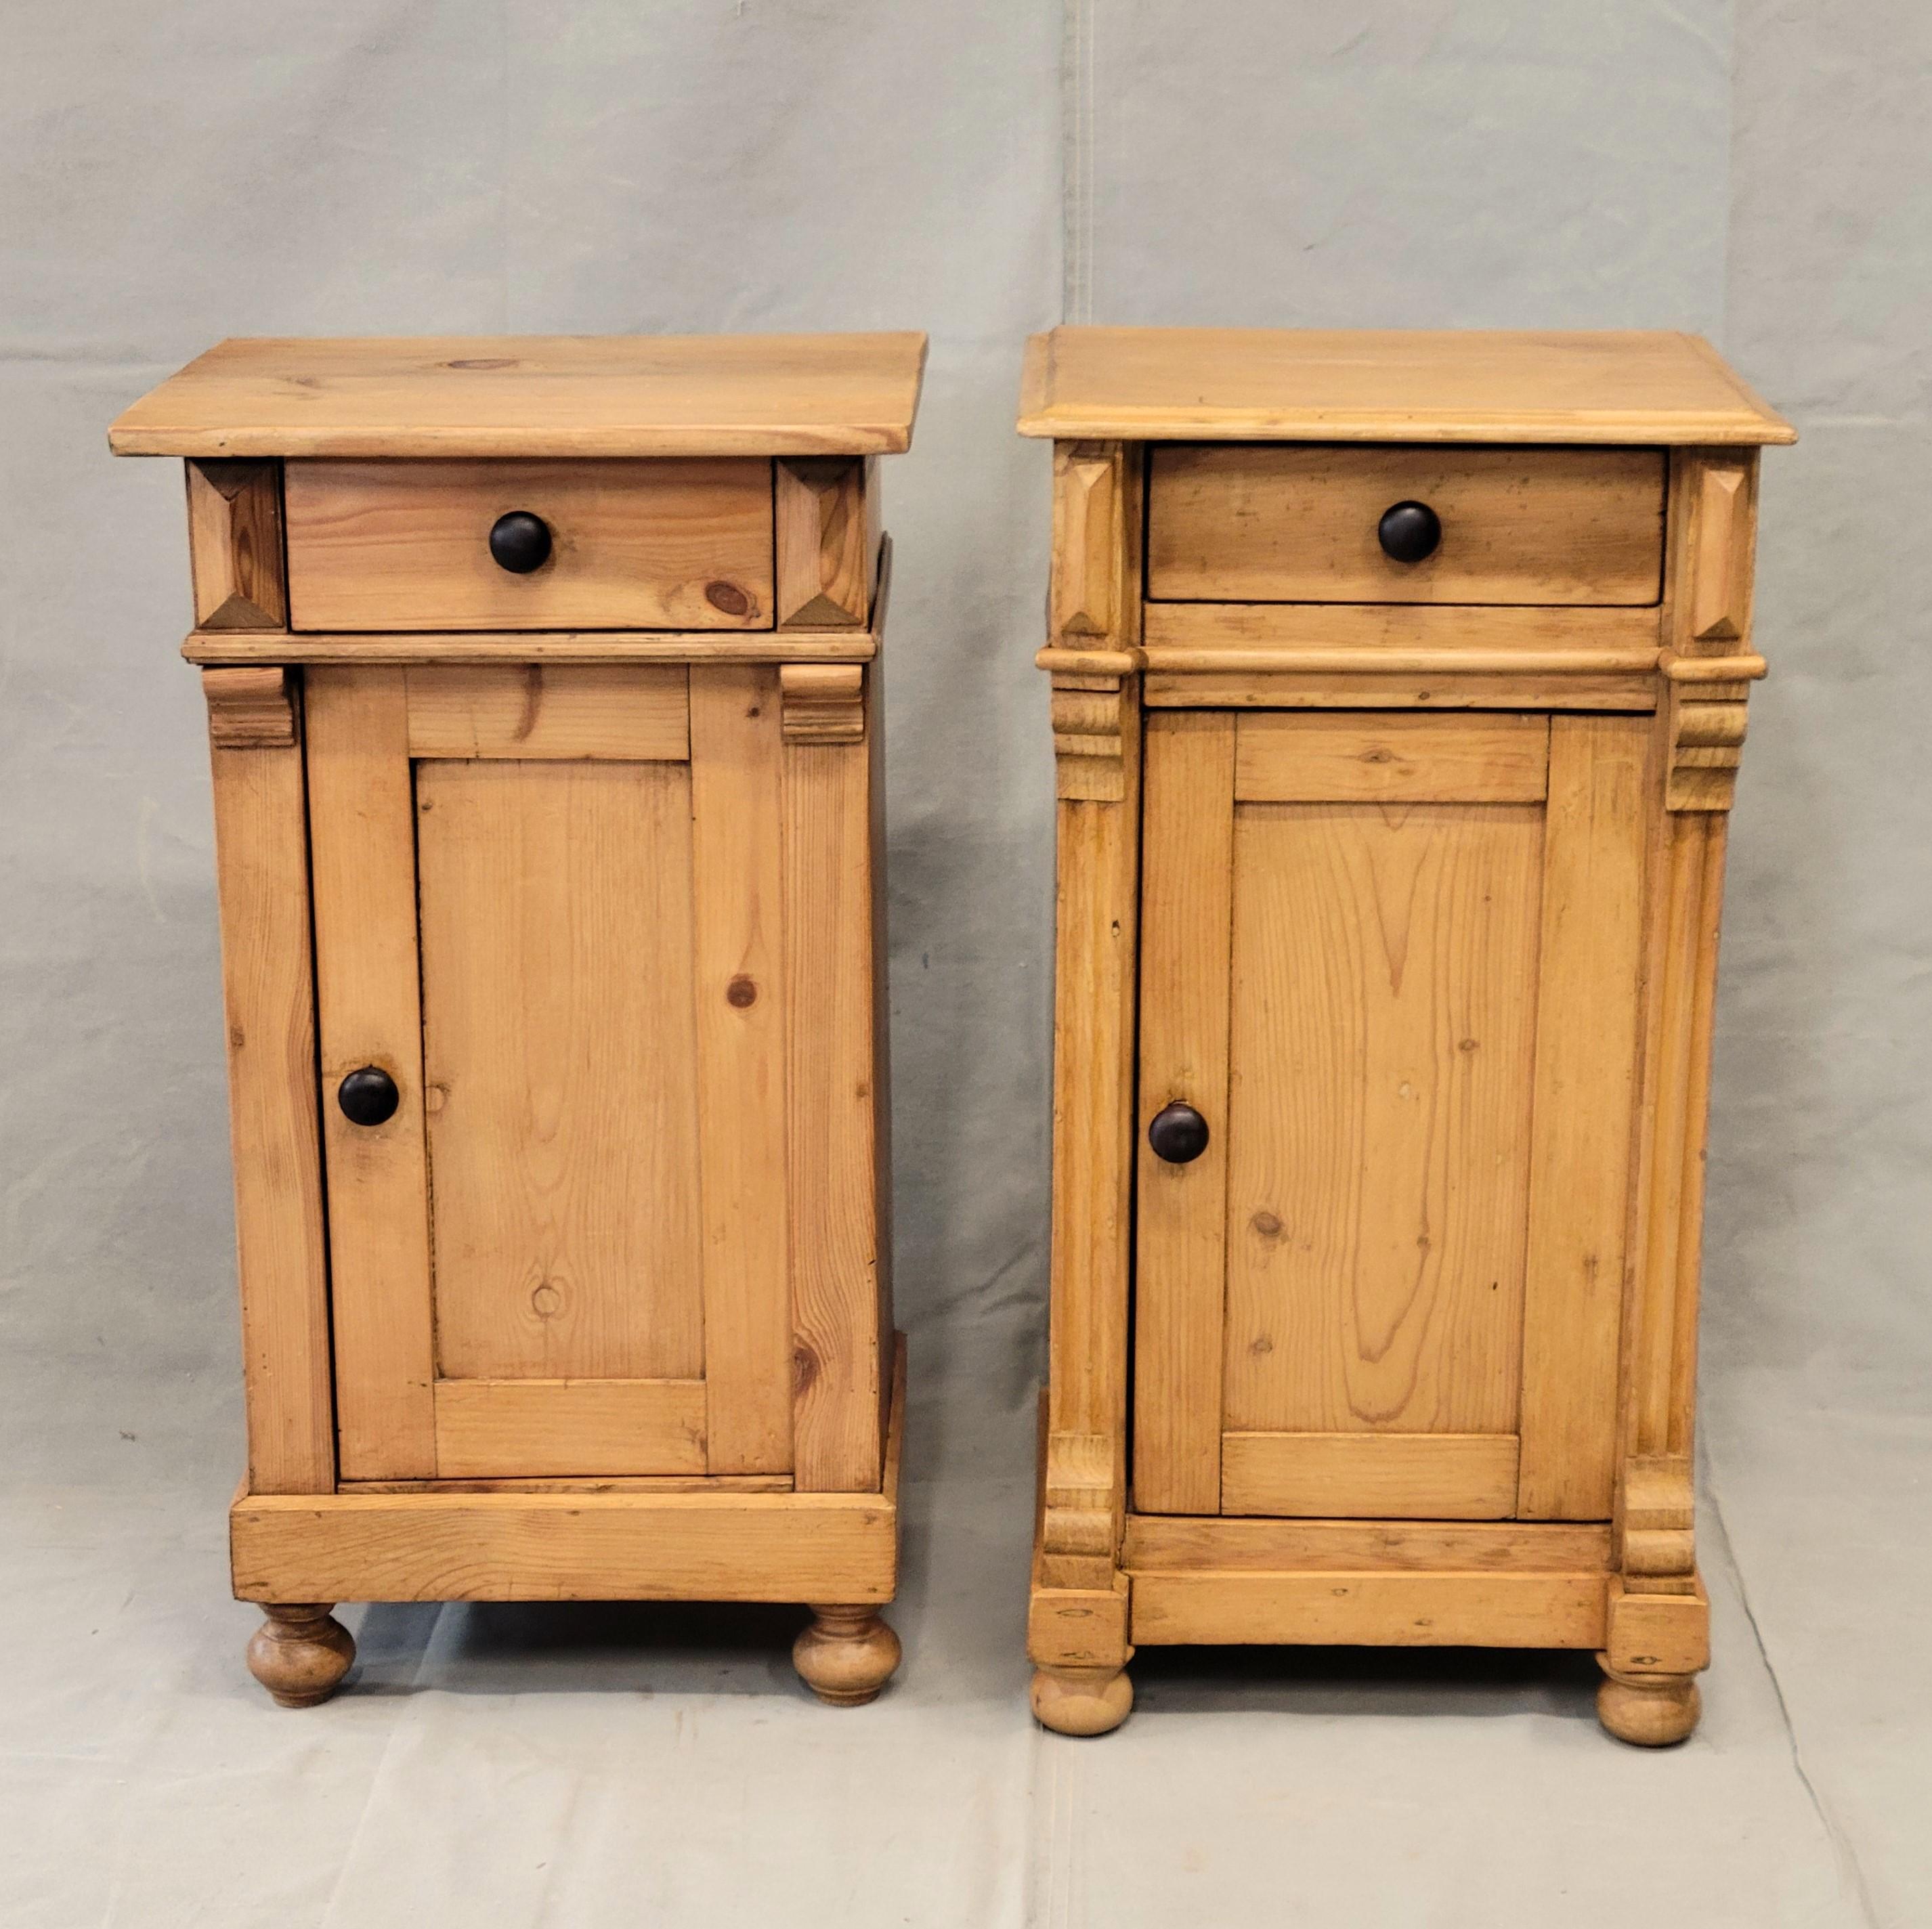 This charming near pair (similar but not the same) of antique Eastern European pine nightstands or side tables add a lovely accent to a bedroom or living area. Each nightstand offers a good amount of storage with a drawer and compartment with a